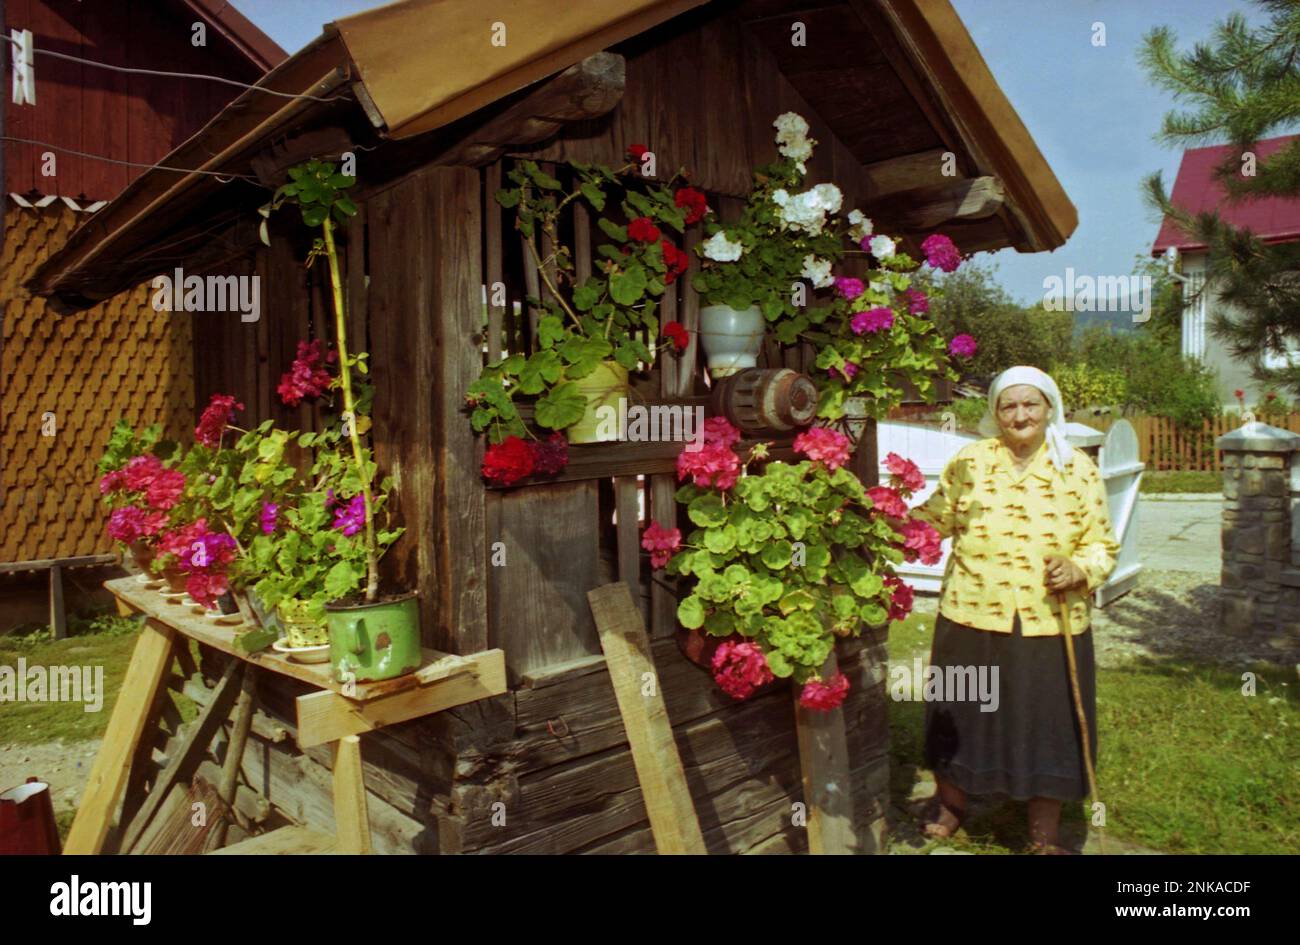 Straja, Suceava County, Romania, 1998. Elderly woman in her yard posing by the flowers hanging on the out of use water well. Stock Photo